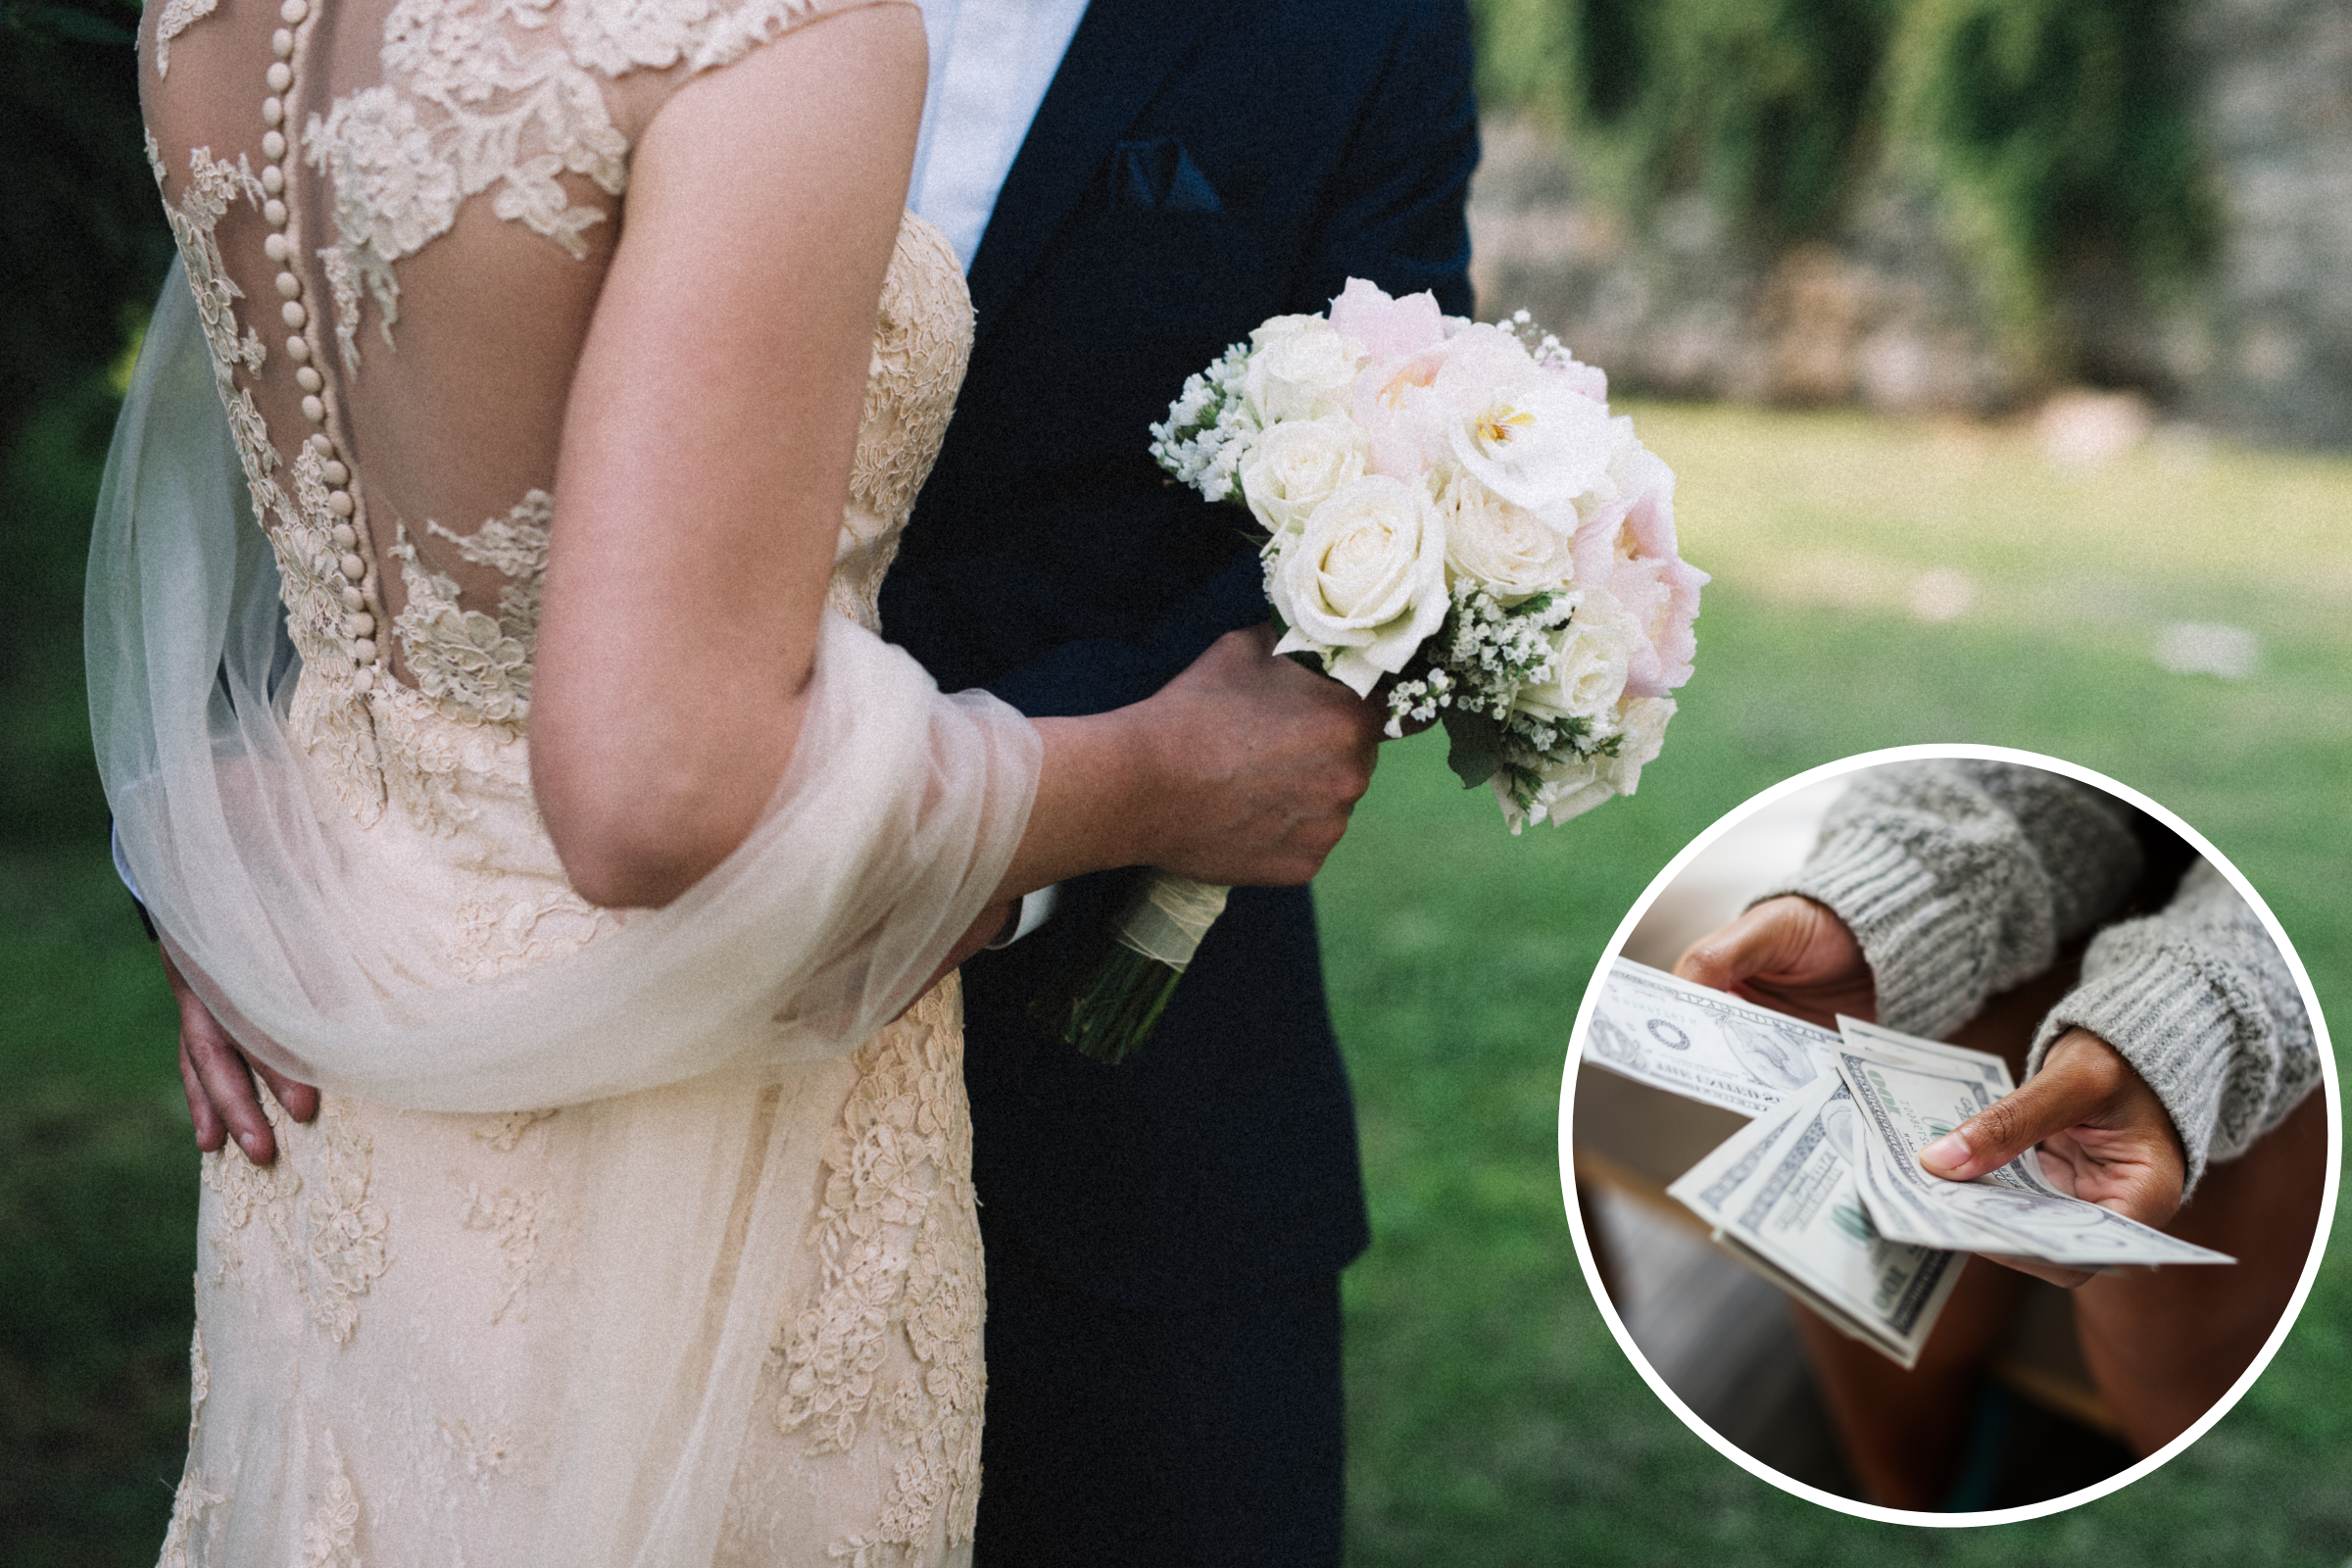 Fury at Why Bride Complained Sister Got More Money Gifted on Her Wedding